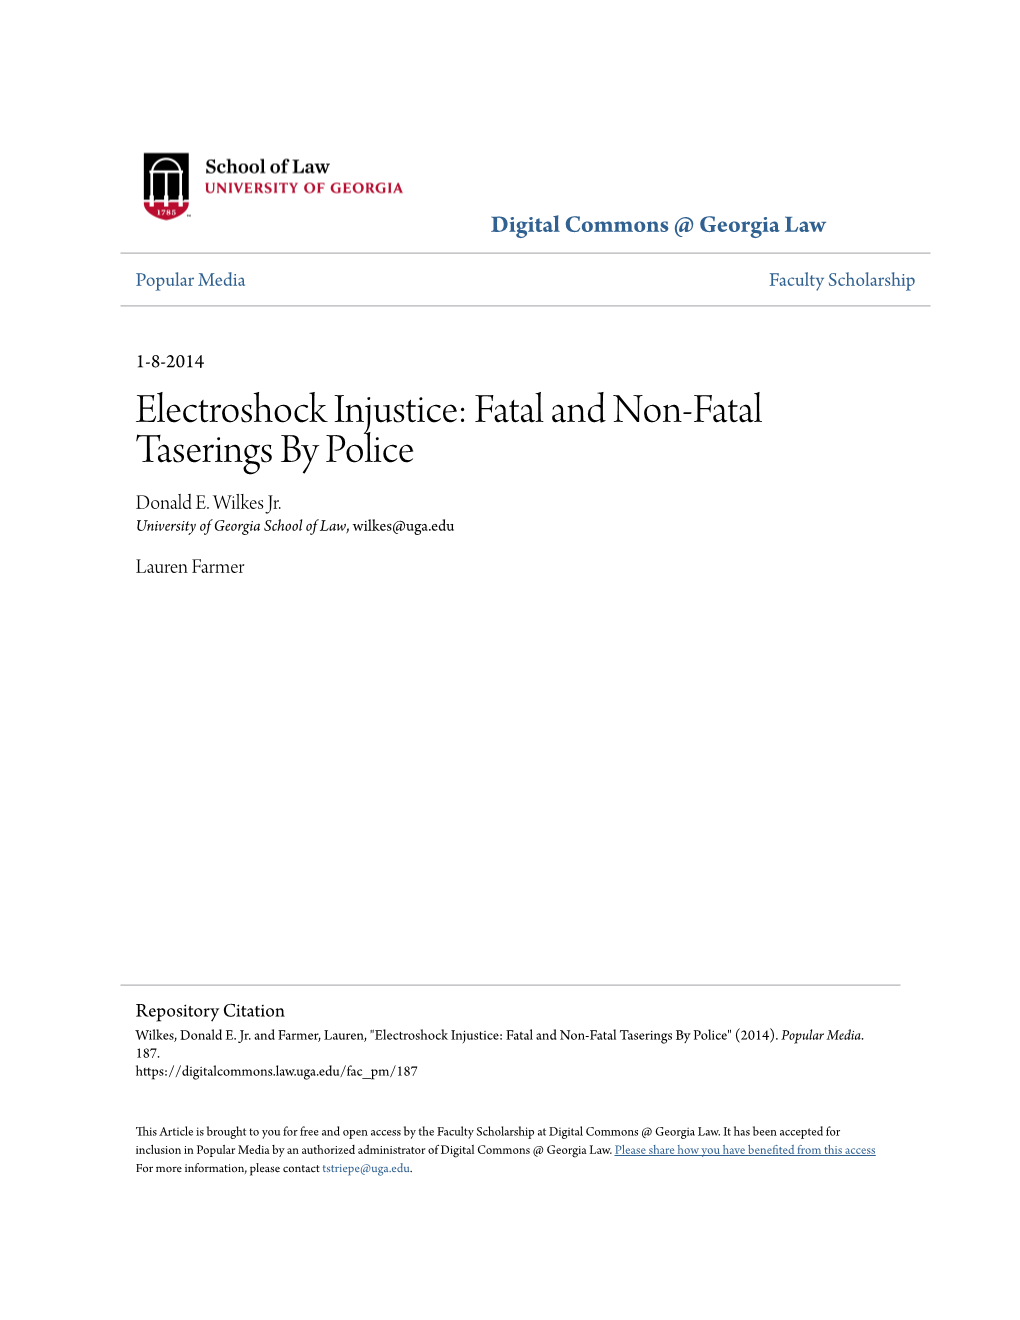 Electroshock Injustice: Fatal and Non-Fatal Taserings by Police Donald E